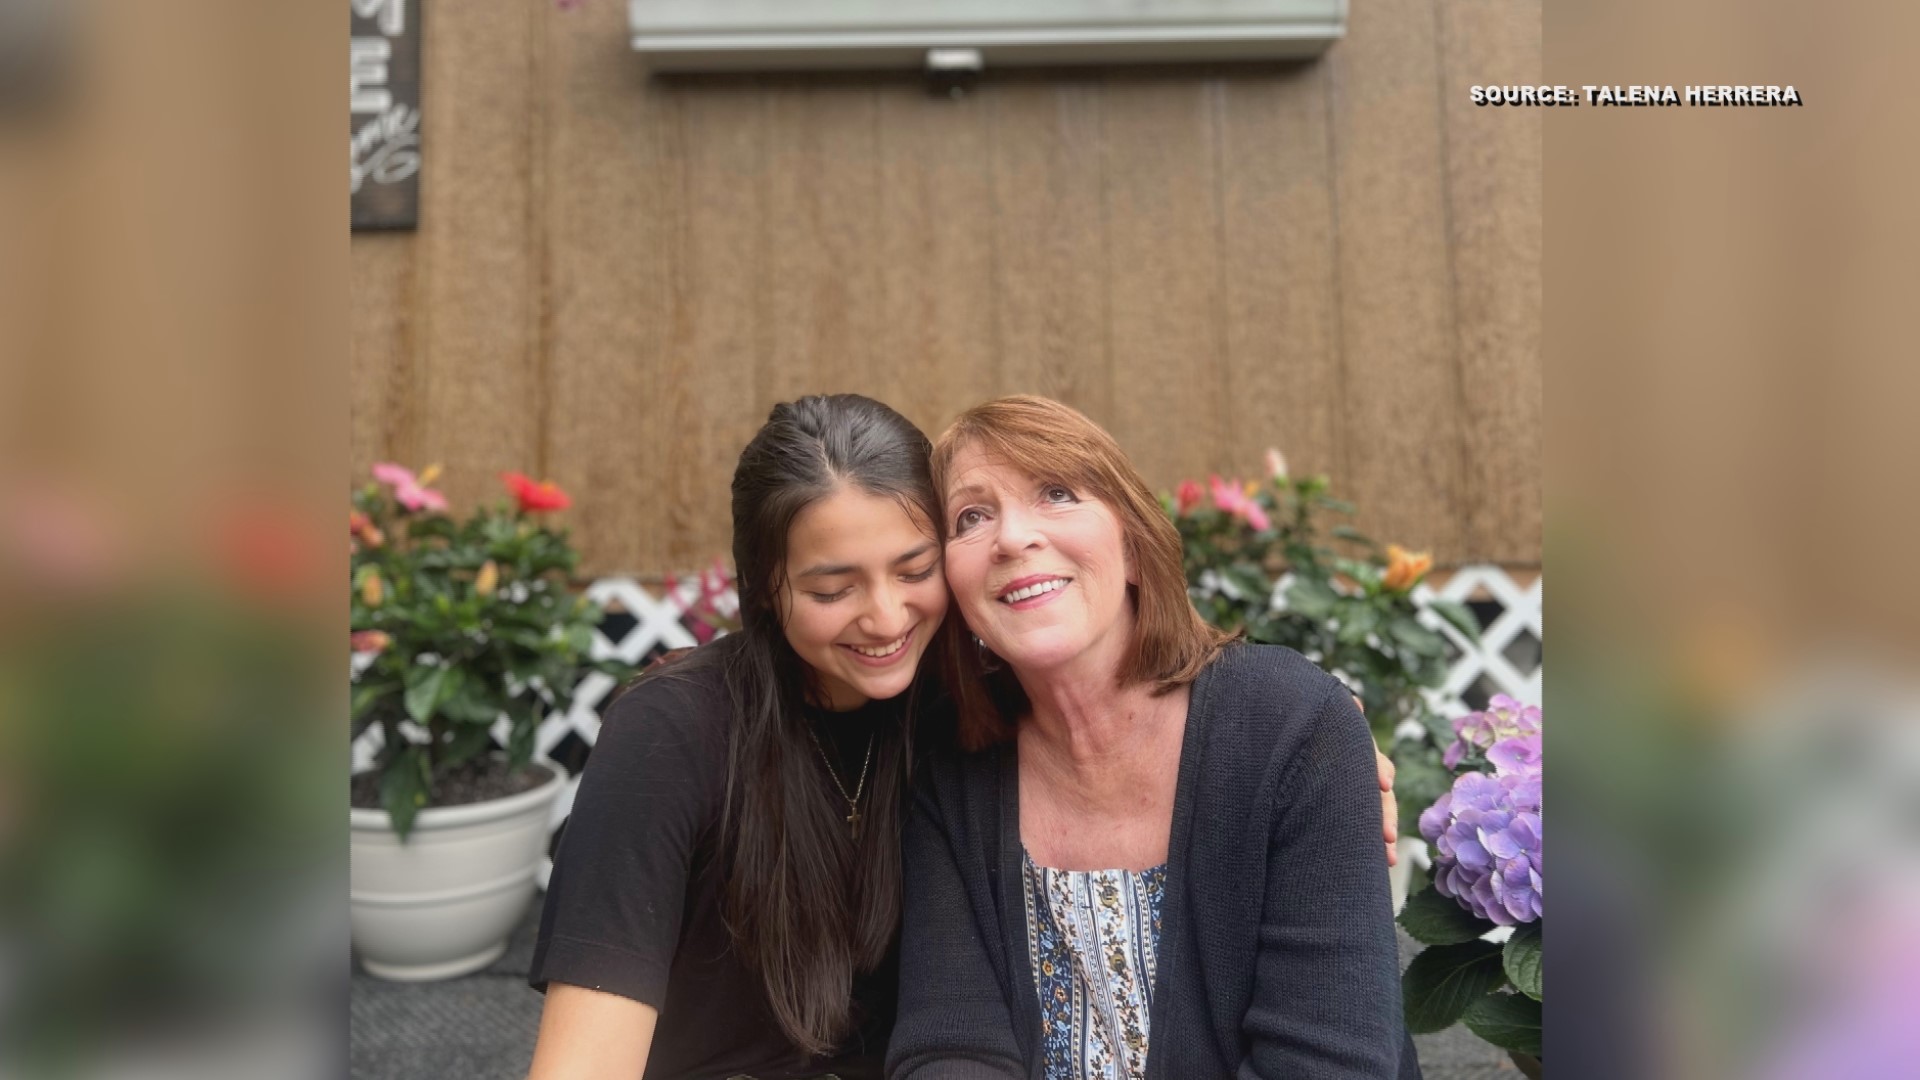 Talena Herrera set her sights on becoming a nurse after being a caretaker for her grandmother Sharon following her grandmother's recent cancer diagnosis.